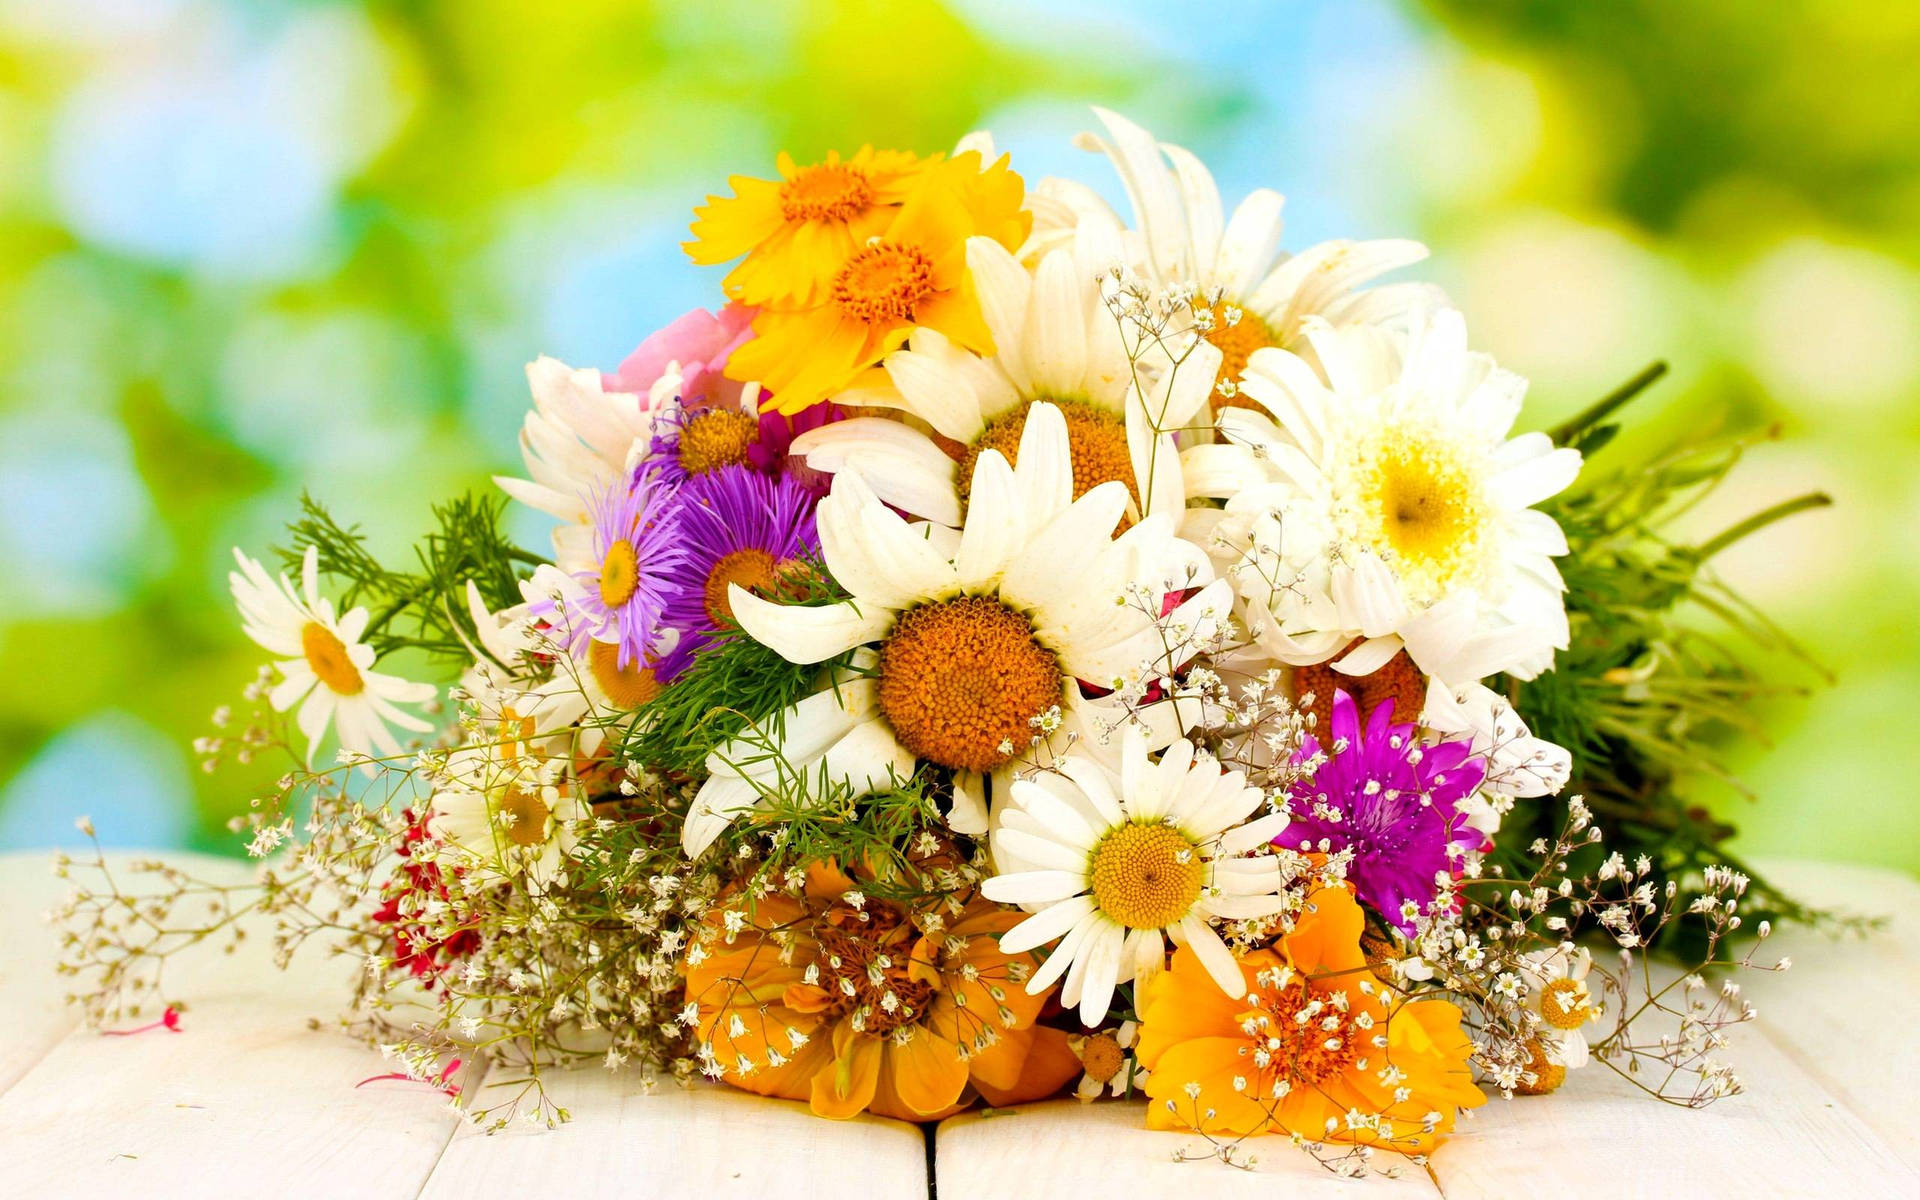 Bouquet Of Daisies And Sunflowers Wallpaper